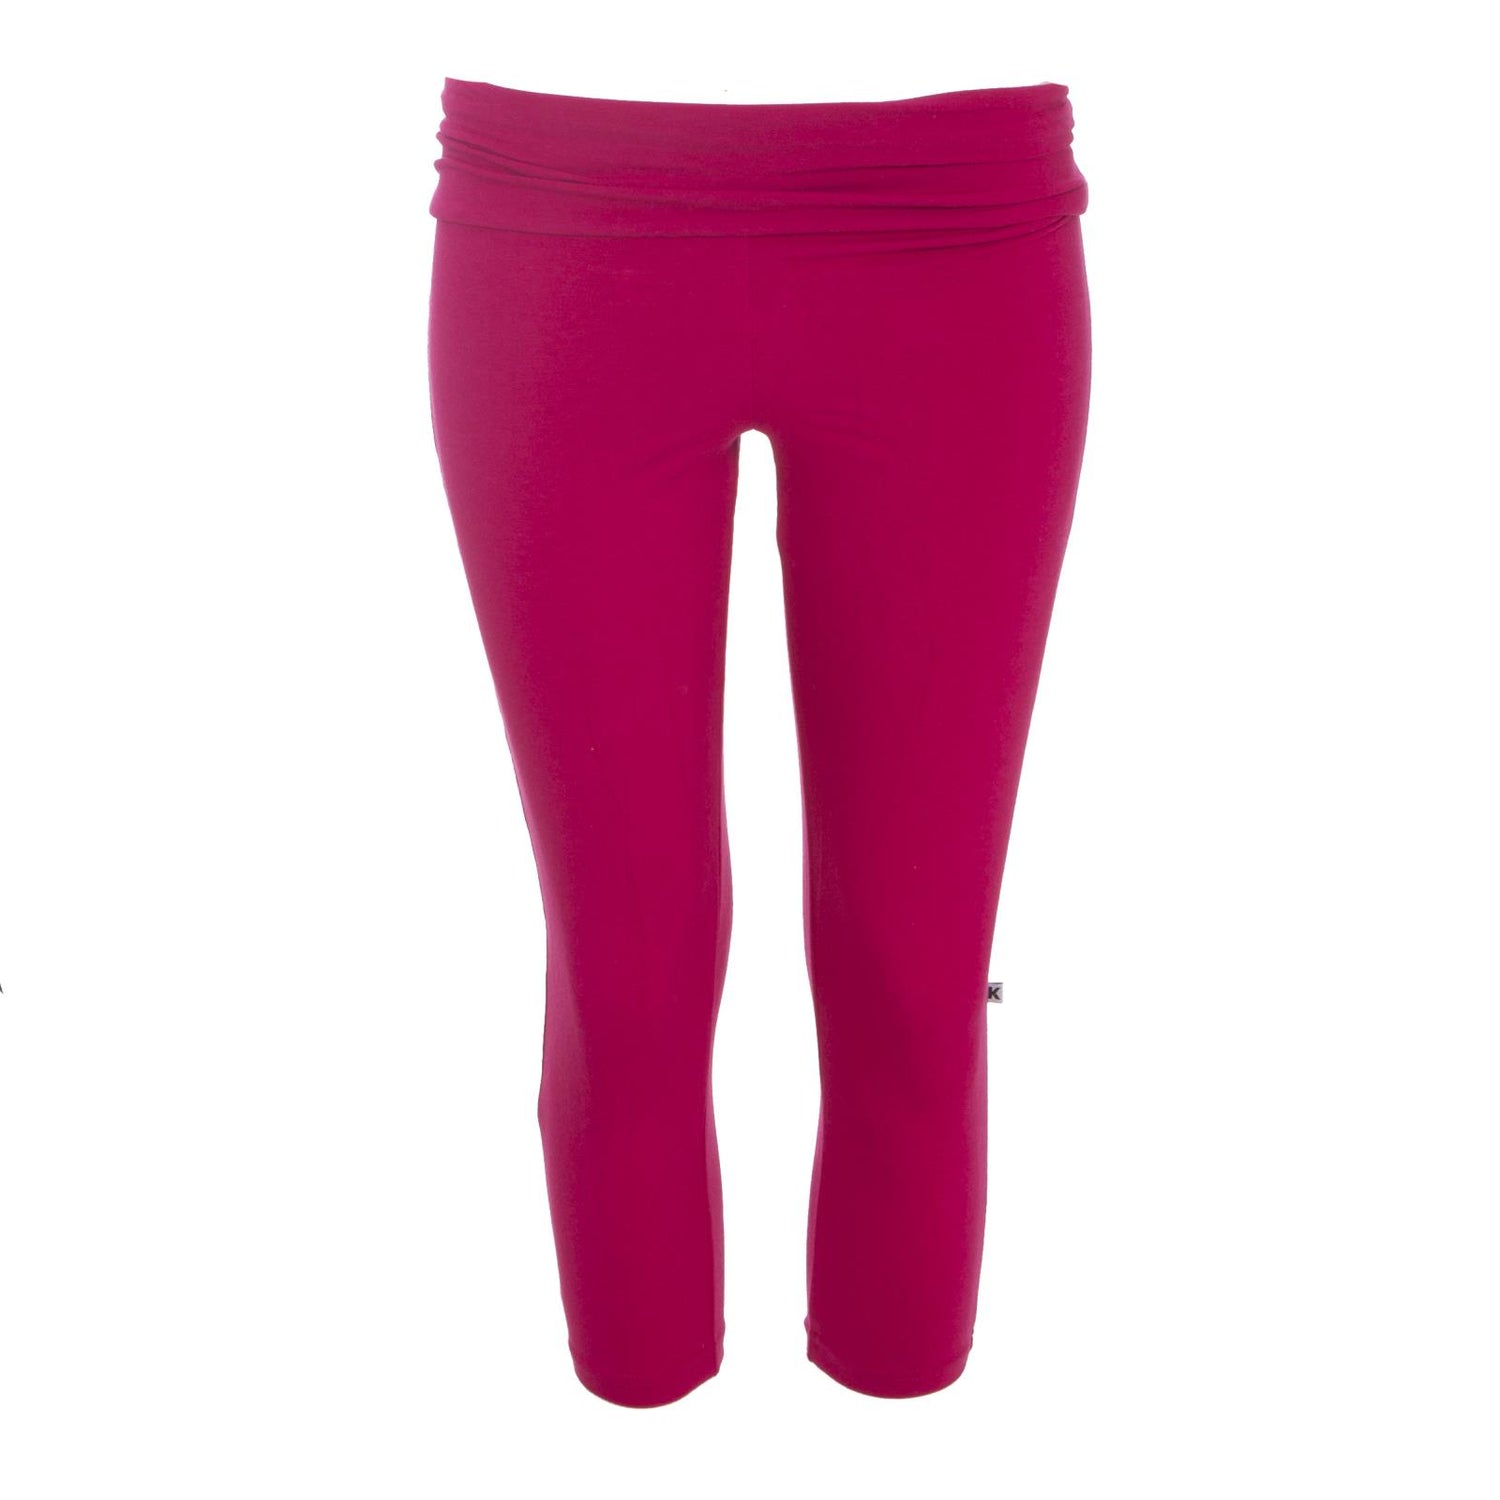 Women's Luxe Stretch 3/4 Legging in Rhododendron